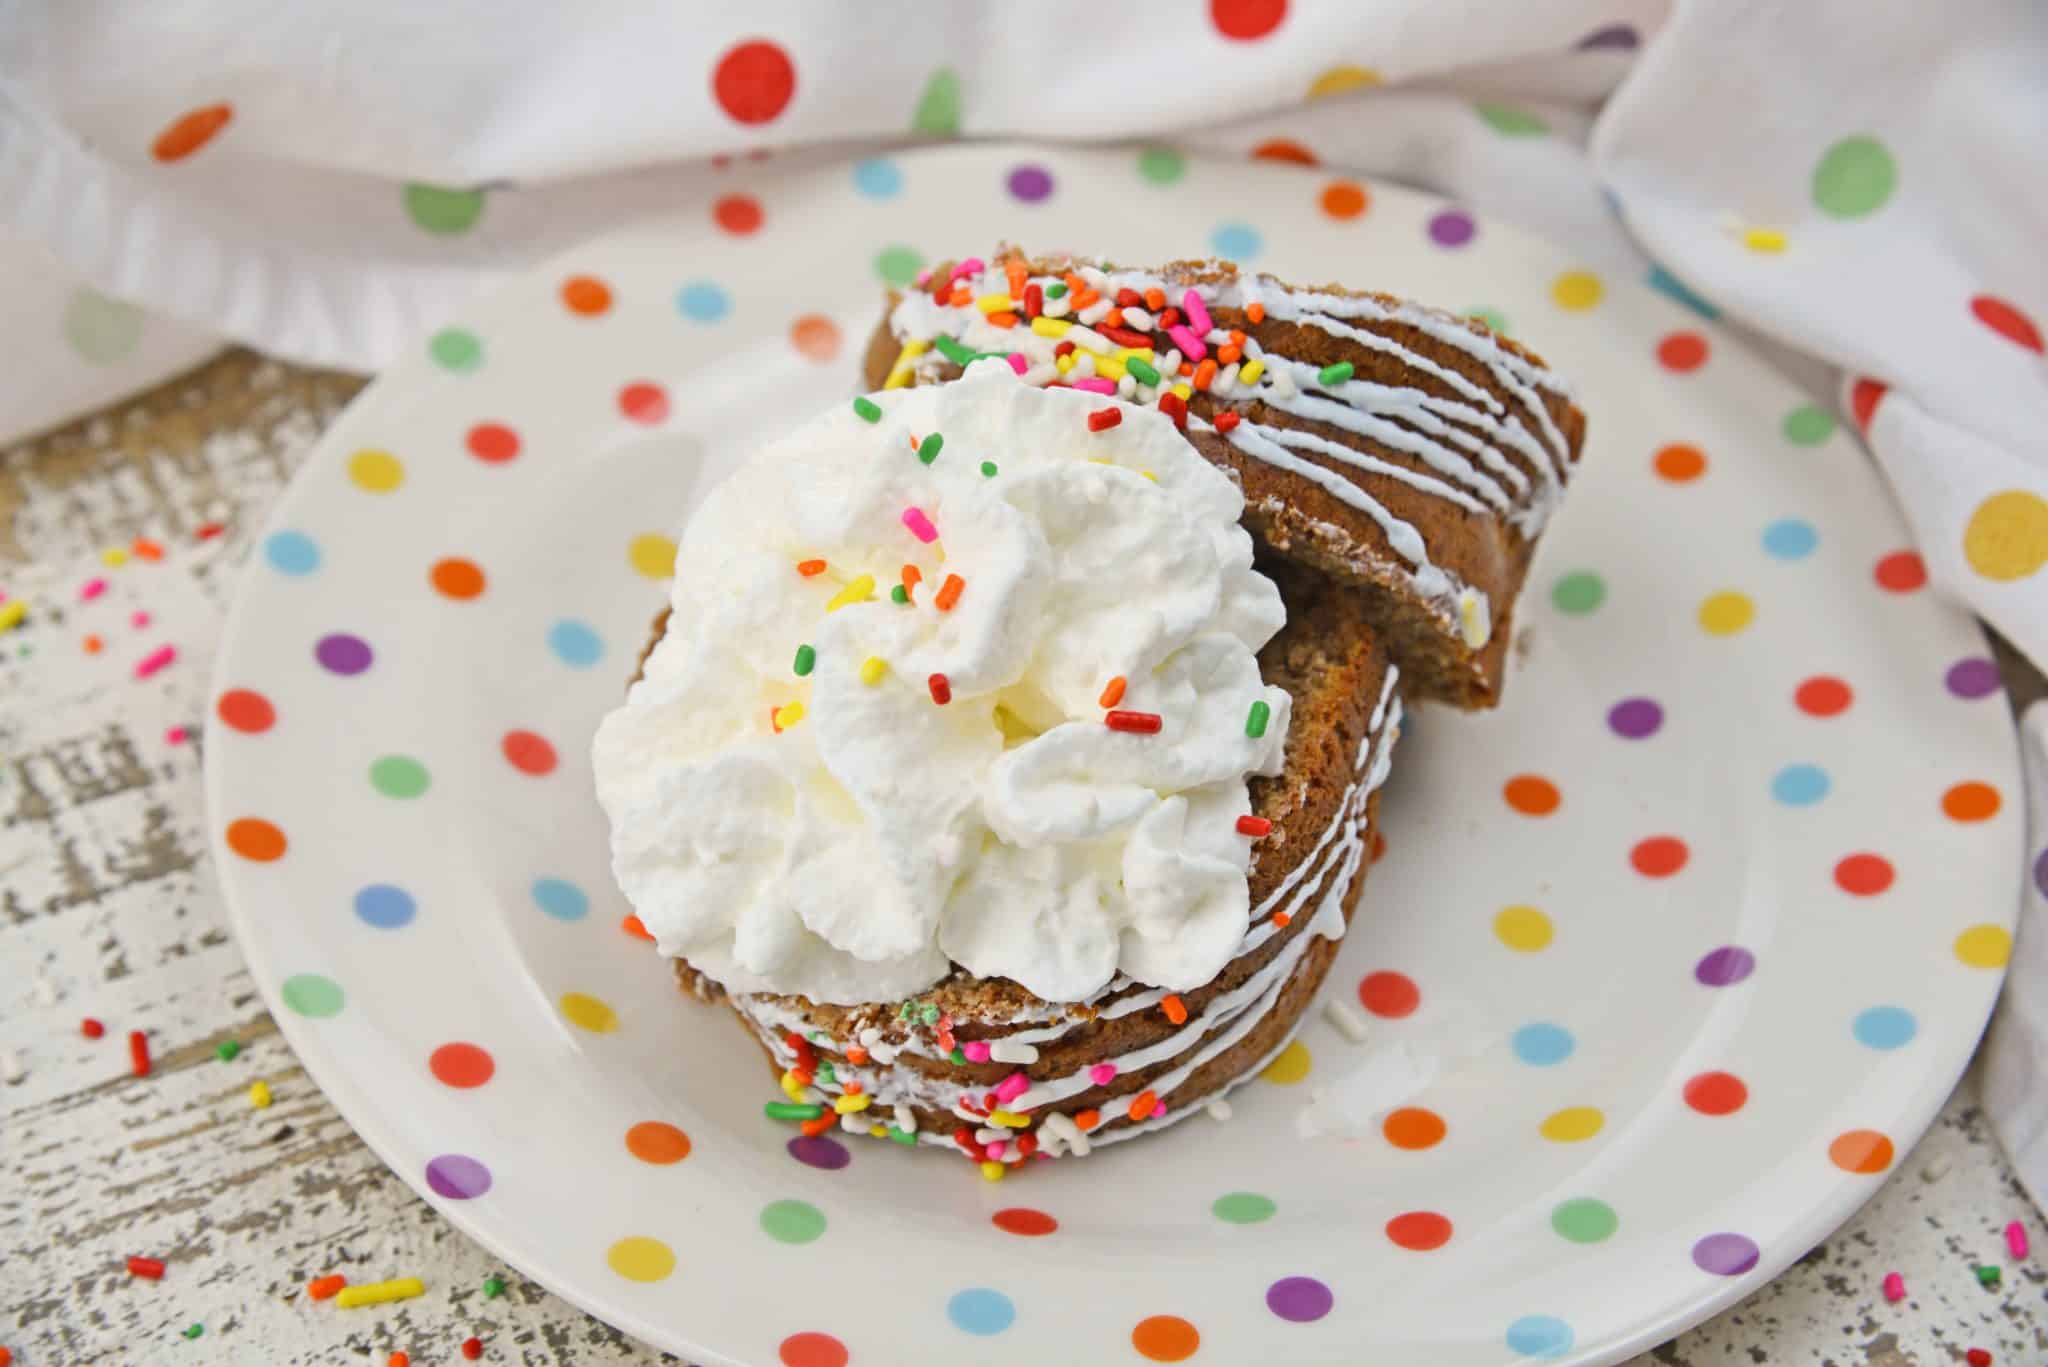 Chocolate Ice Cream Bread is an easy and fun way to use ice cream using just a few common kitchen ingredients. Add cookie frosting and colorful sprinkles for a surprisingly good munchie. #icecreambread #chocolateicecream www.savoryexperiments.com